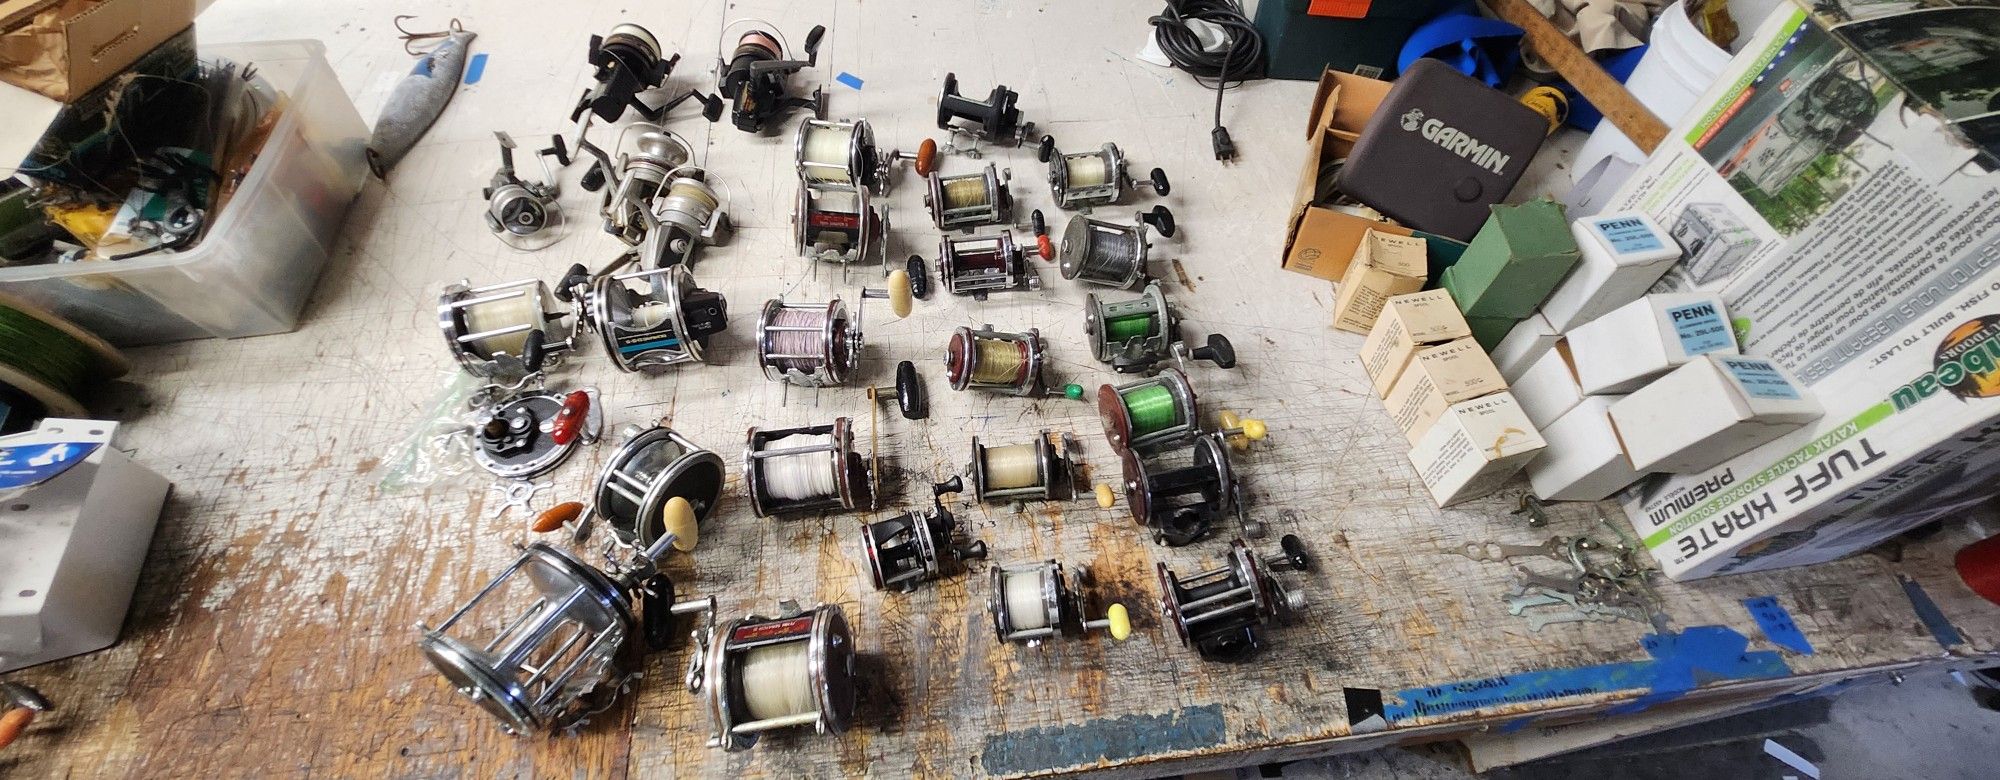 Penn Fishing Reels  And Parts